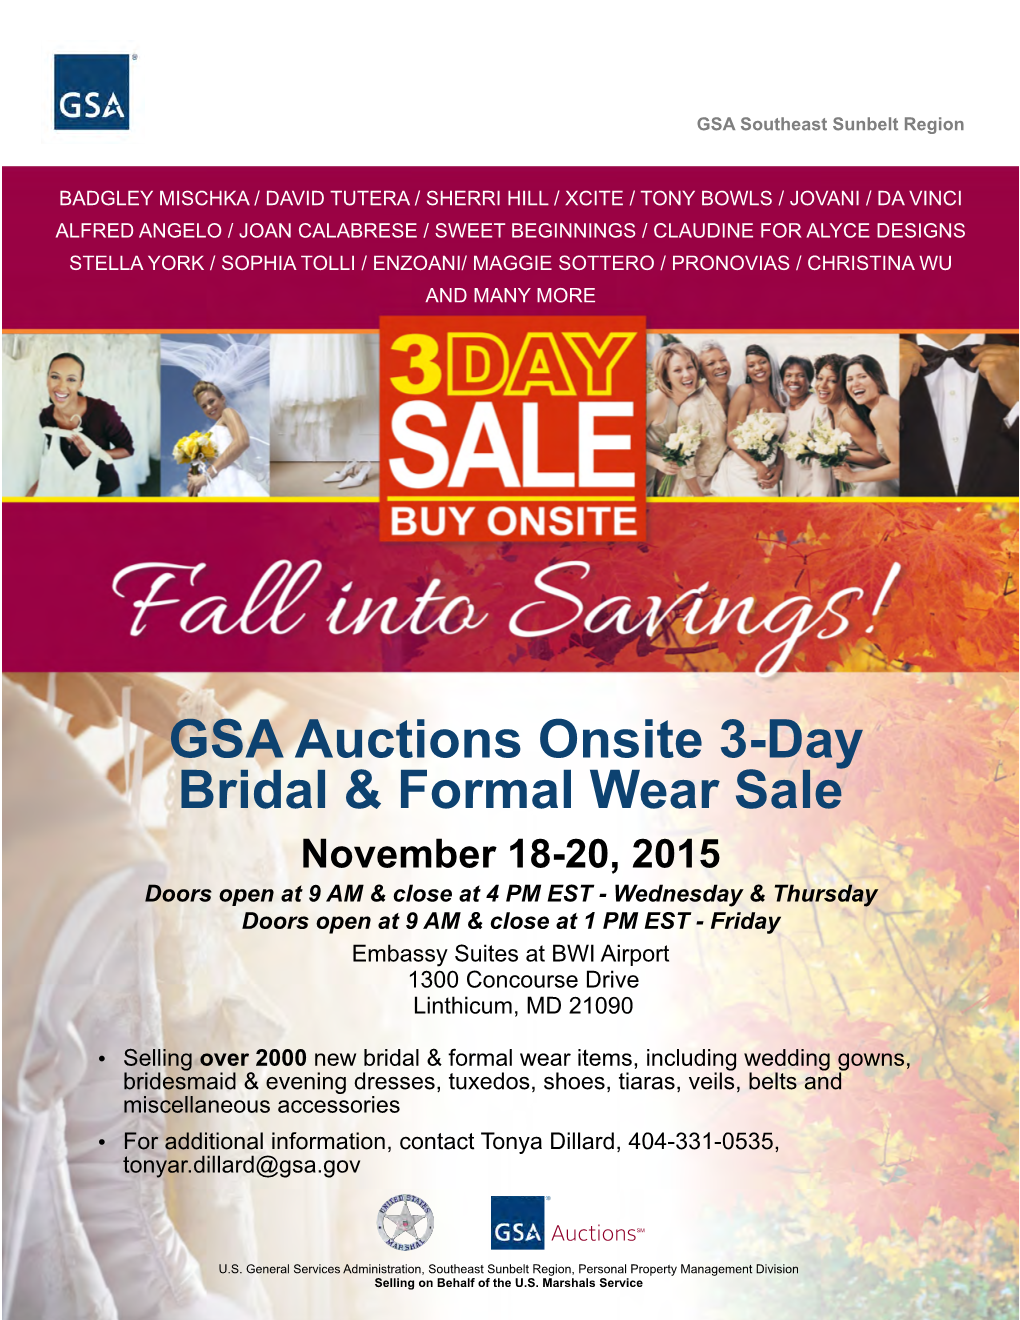 GSA Auctions Onsite 3-Day Bridal & Formal Wear Sale